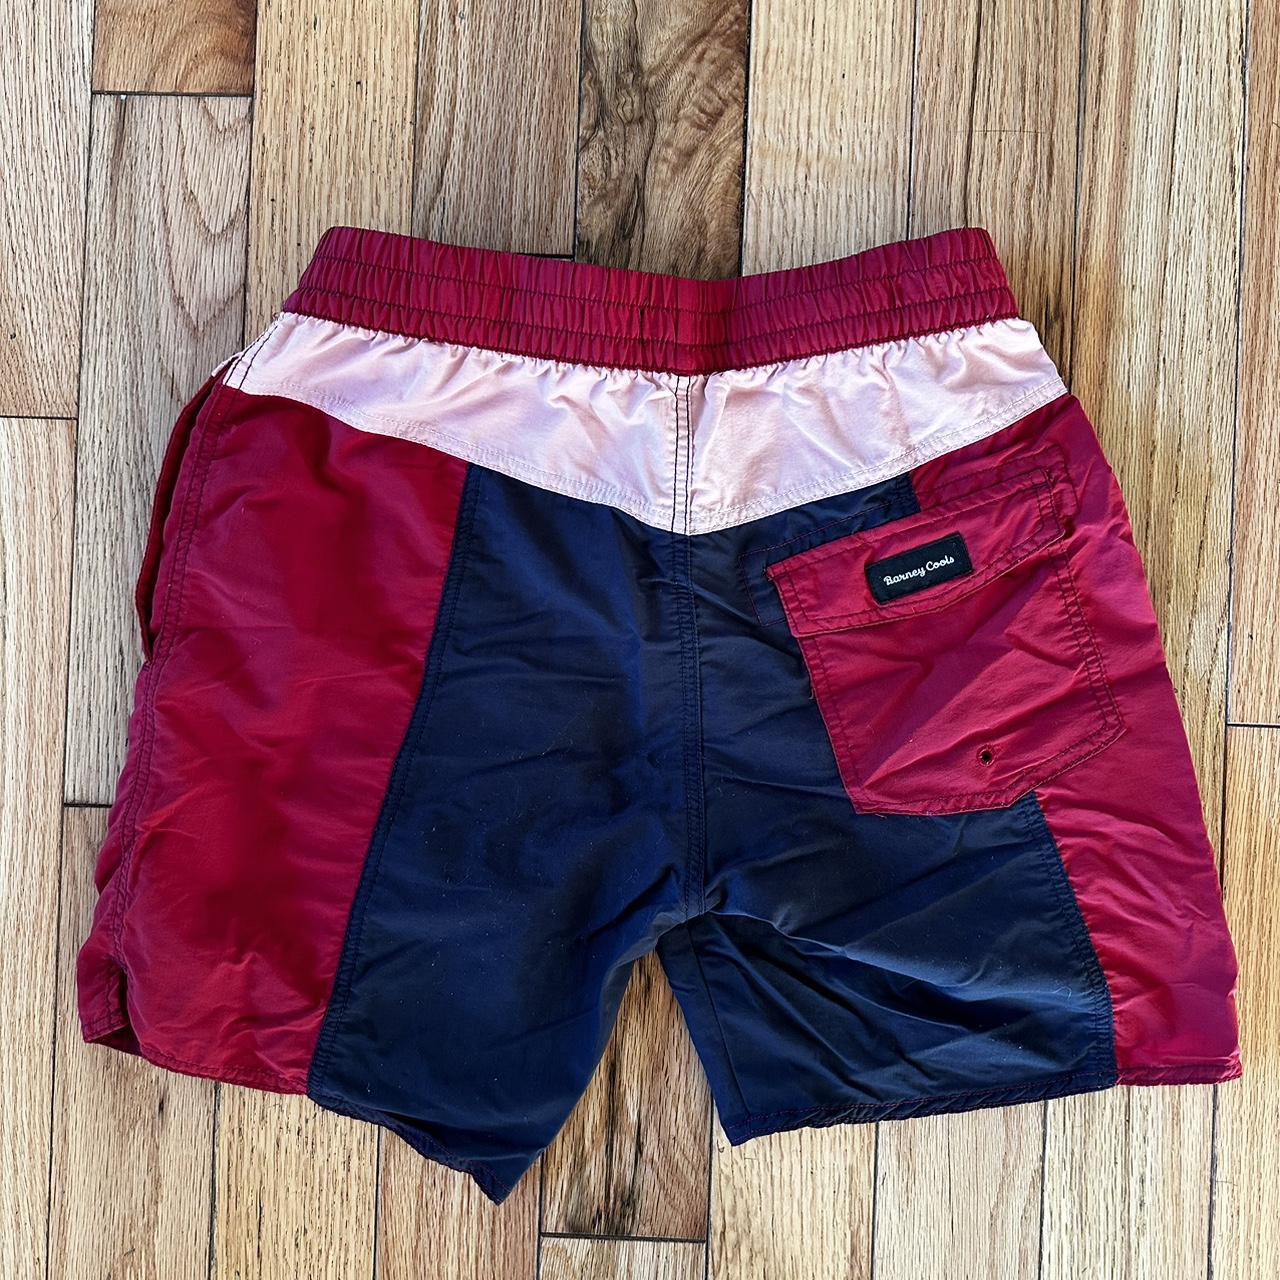 Barney Cools Men's Blue and Burgundy Shorts (2)